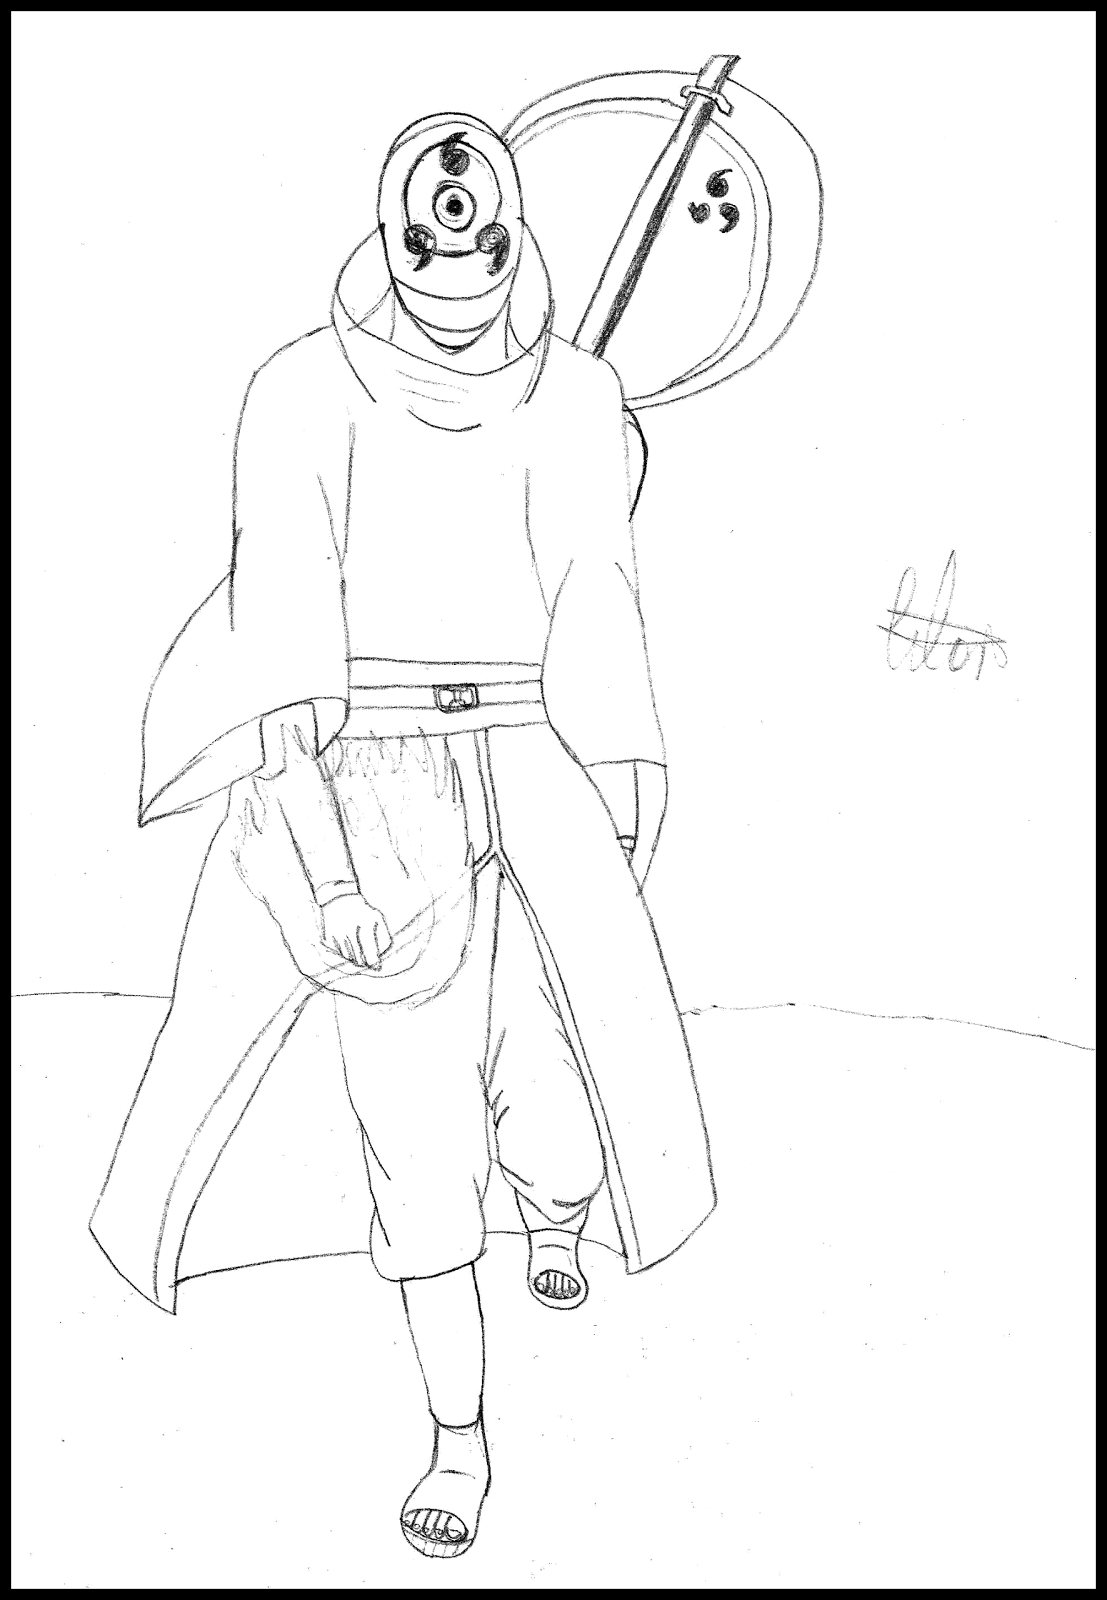 Naruto Tobi Characters Coloring Pages (Page 1) - Line.17QQ.com